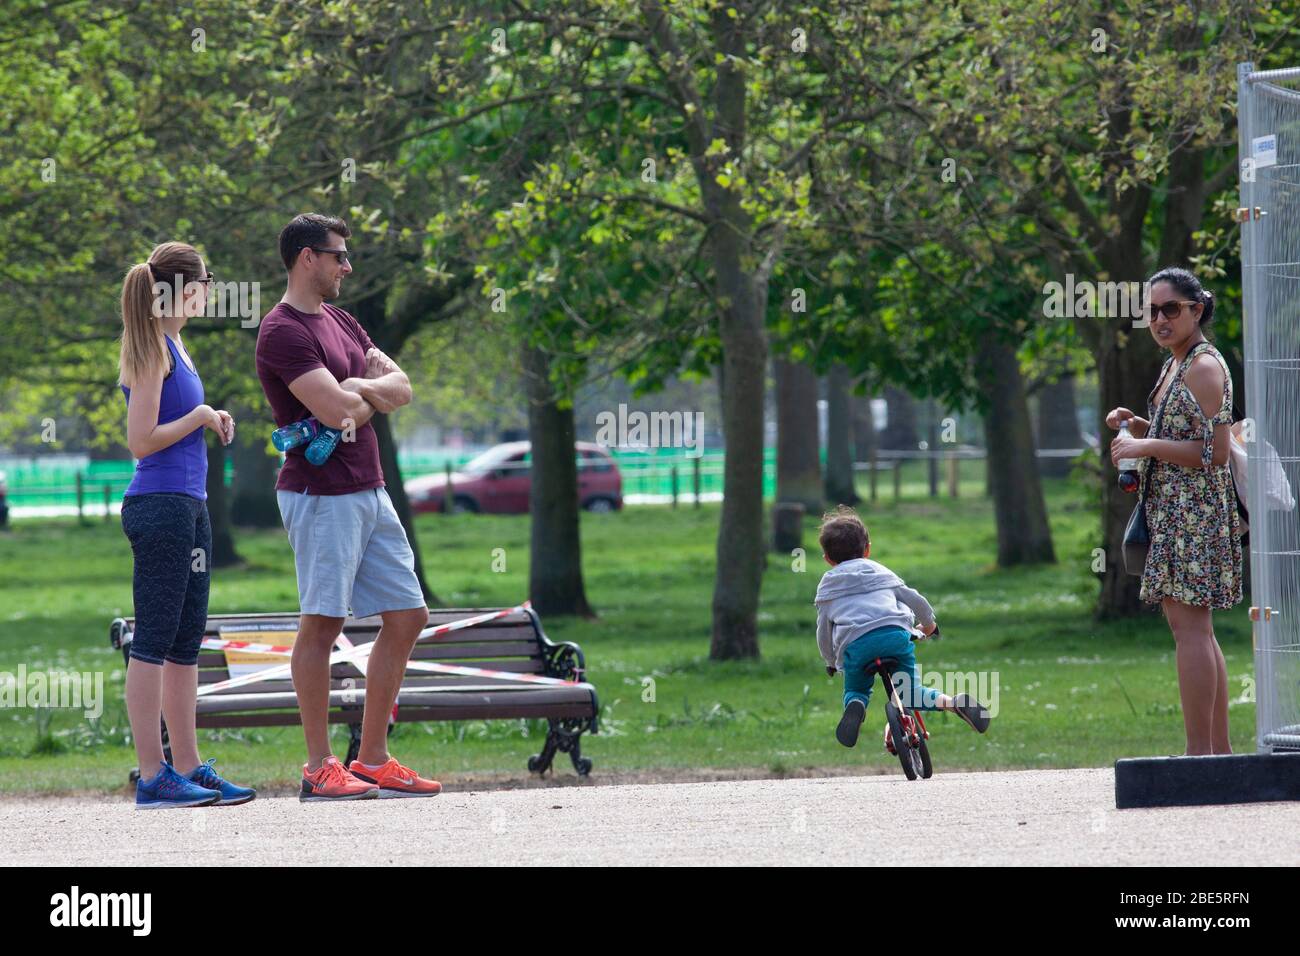 London, UK, 12 April 2020: On Easter Sunday people observe social distancing rules as they take exercise and fresh air in the sunshine on Clapham Common. Anna Watson/ Alamy Live News Stock Photo